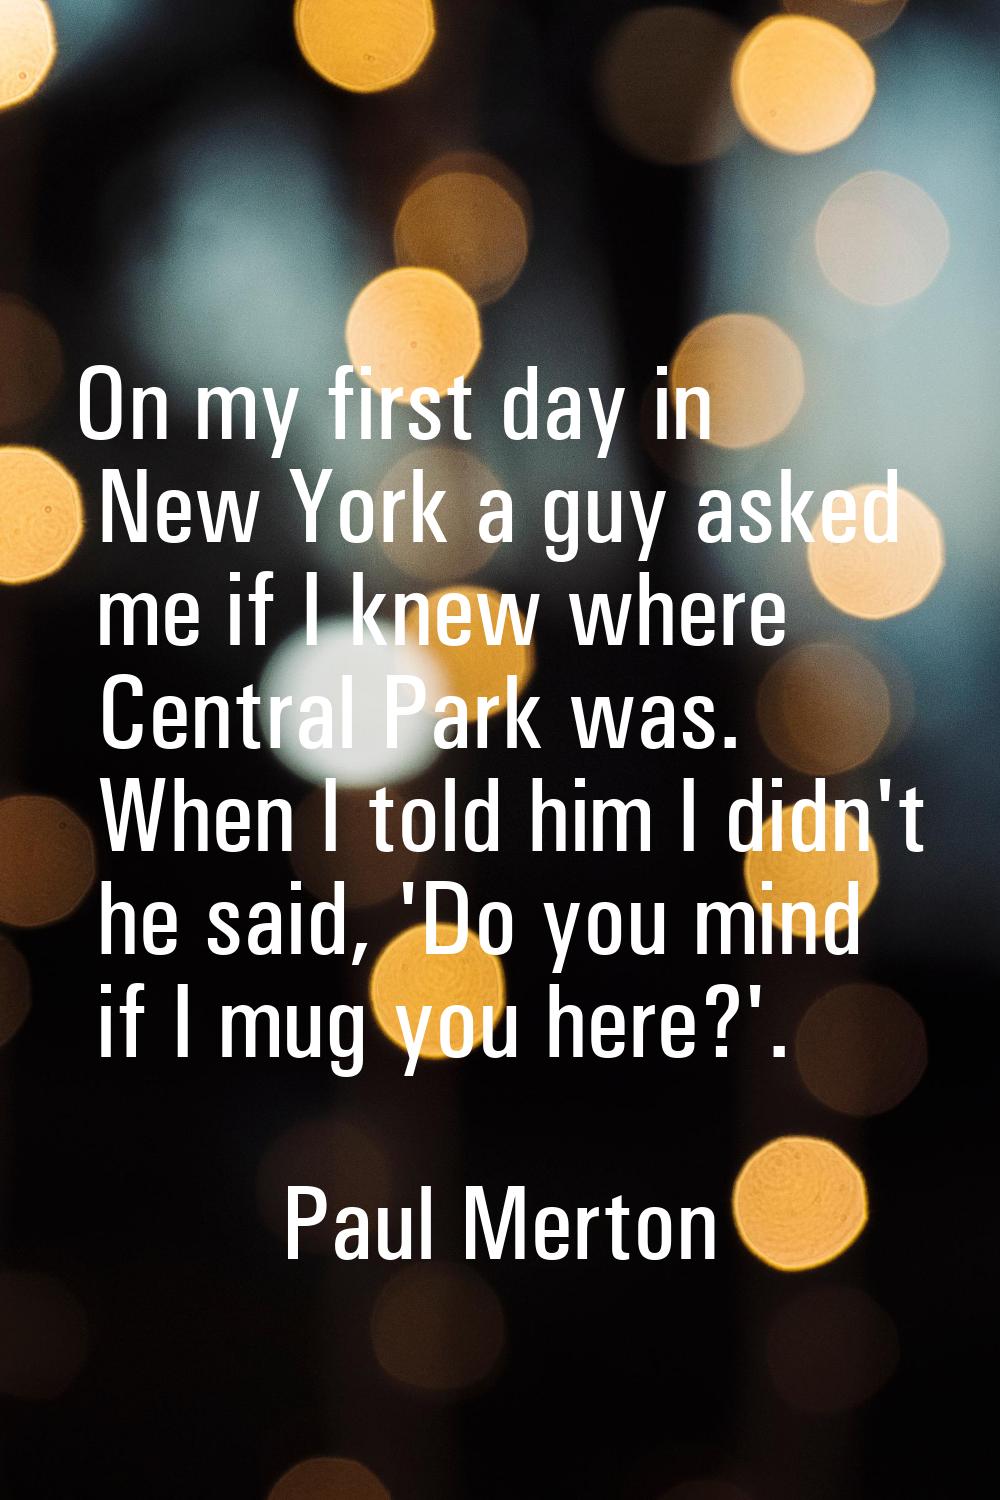 On my first day in New York a guy asked me if I knew where Central Park was. When I told him I didn